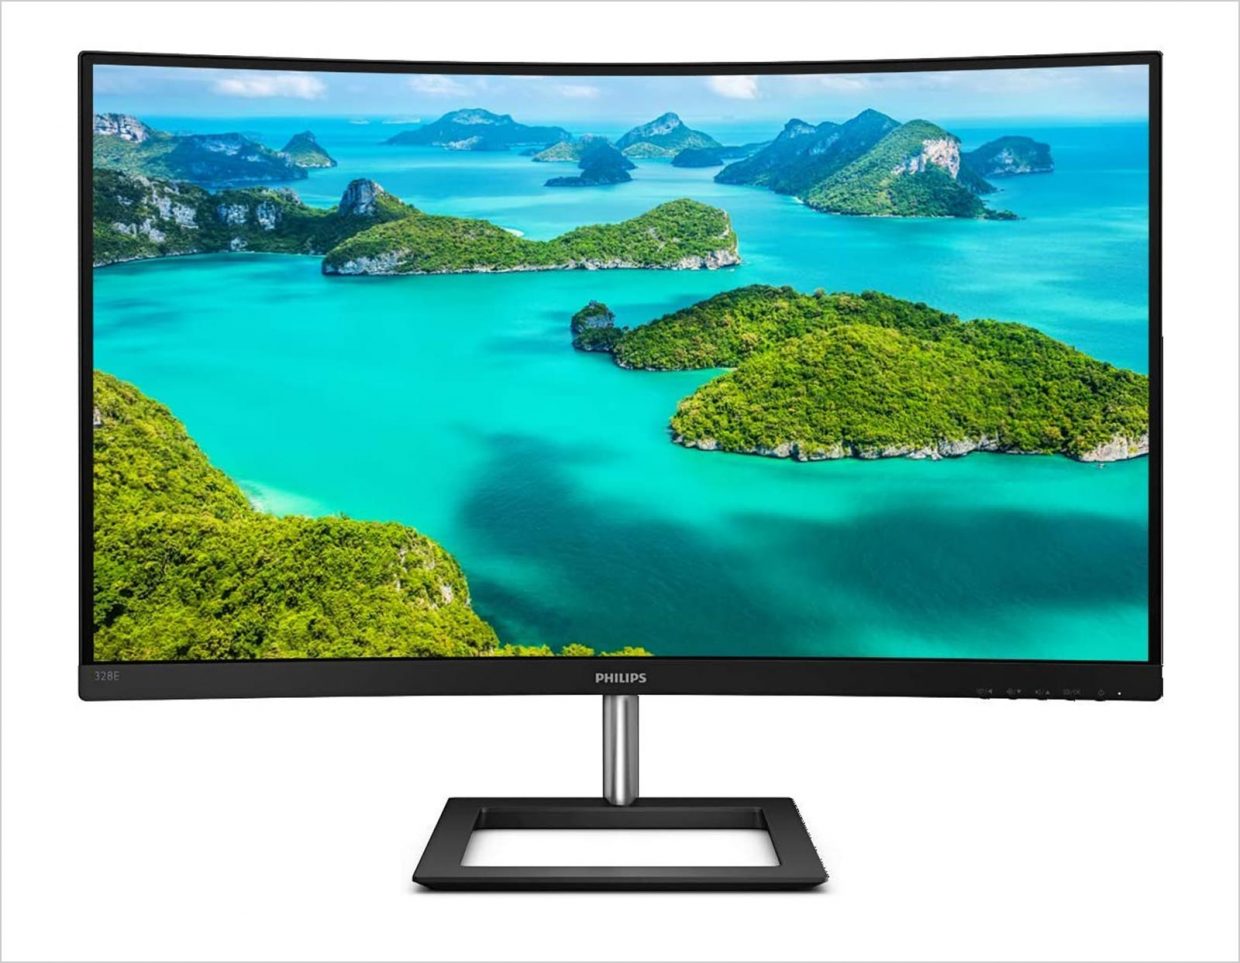 CURVED MONITOR GRAPHIC DESIGN